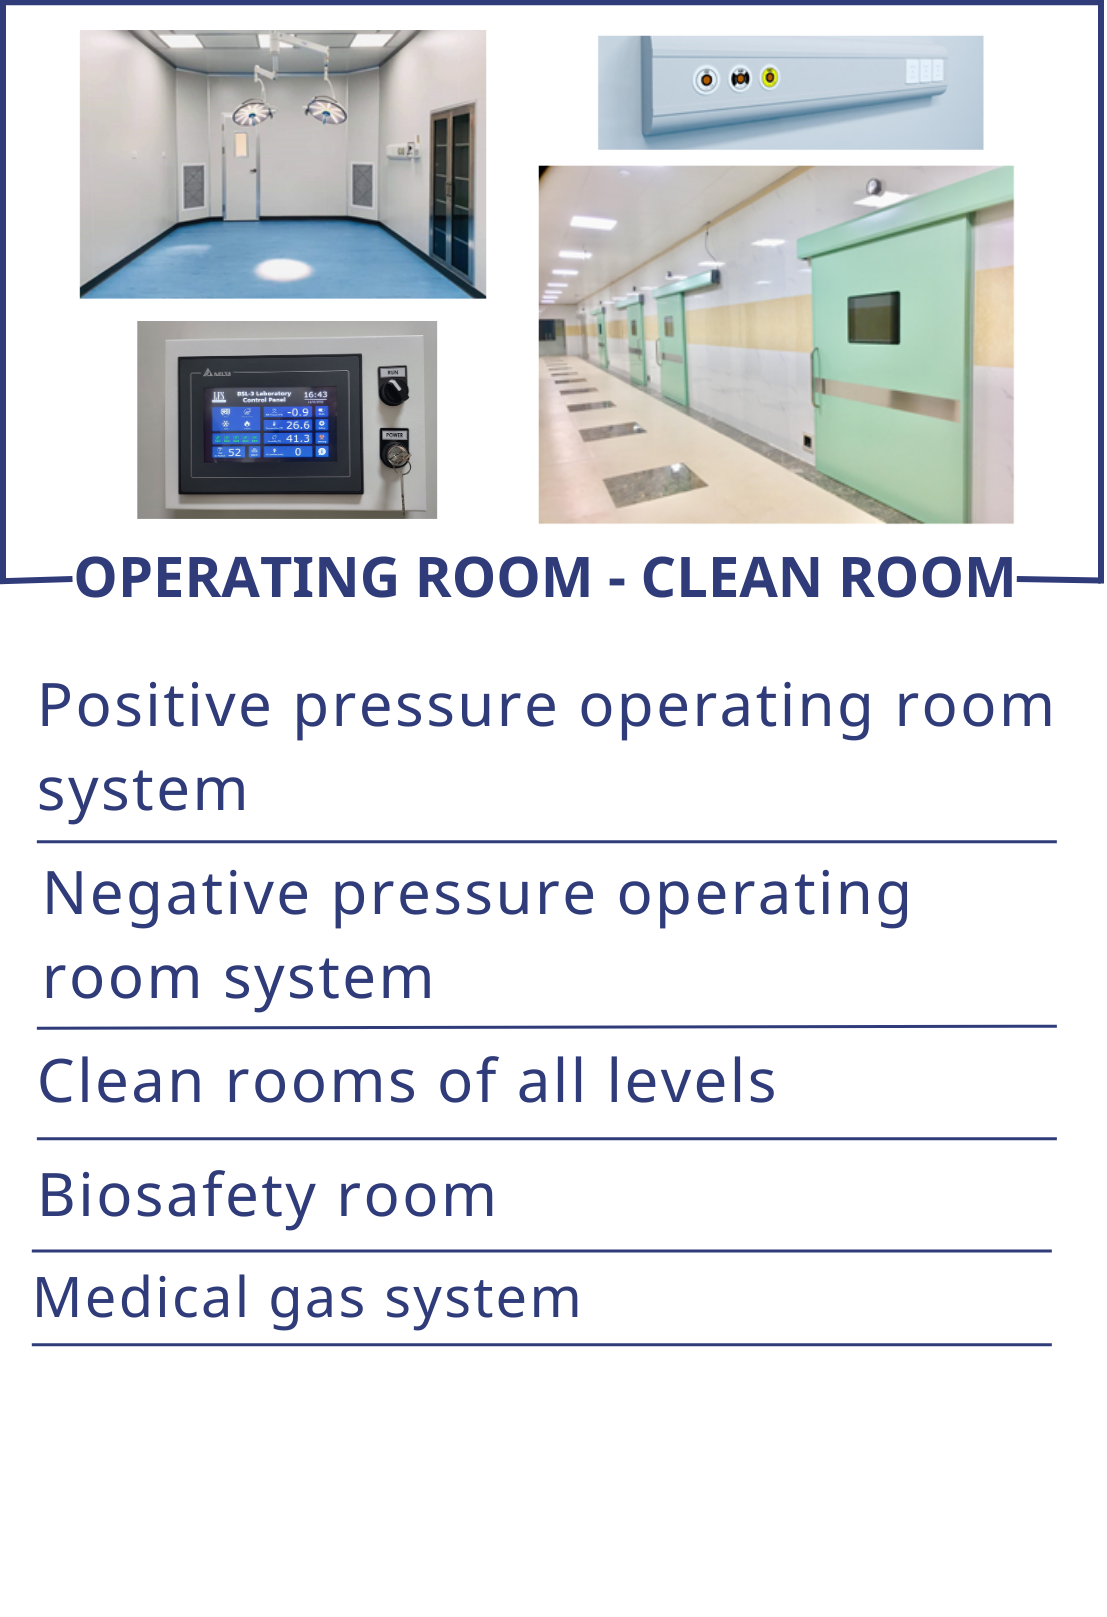 Operating room - Clean room